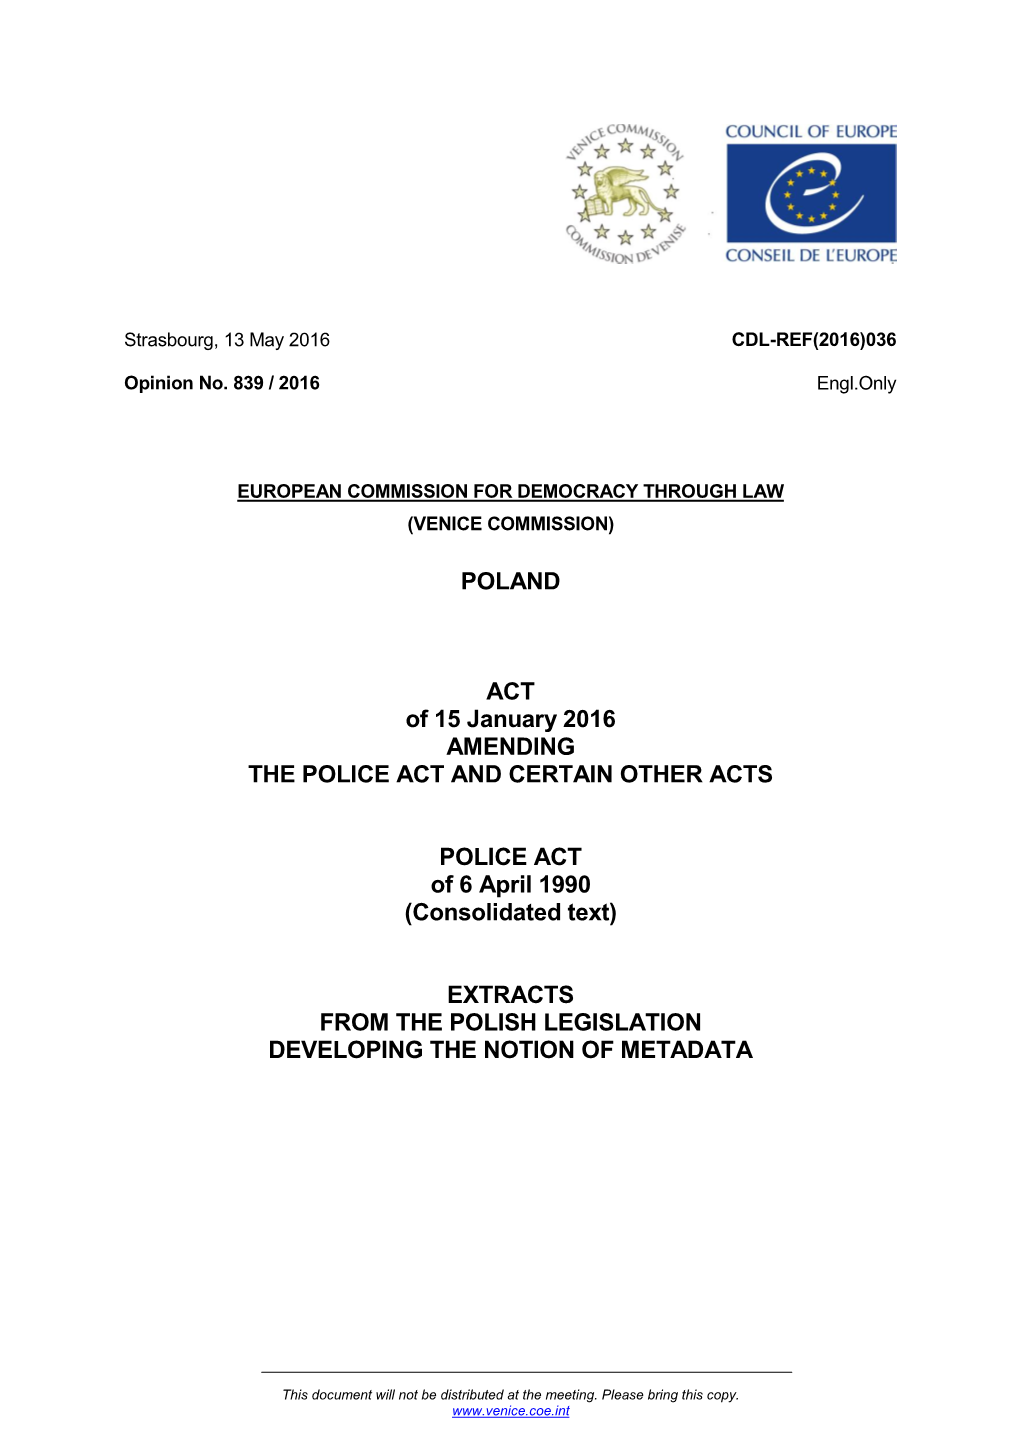 POLAND ACT of 15 January 2016 AMENDING the POLICE ACT AND